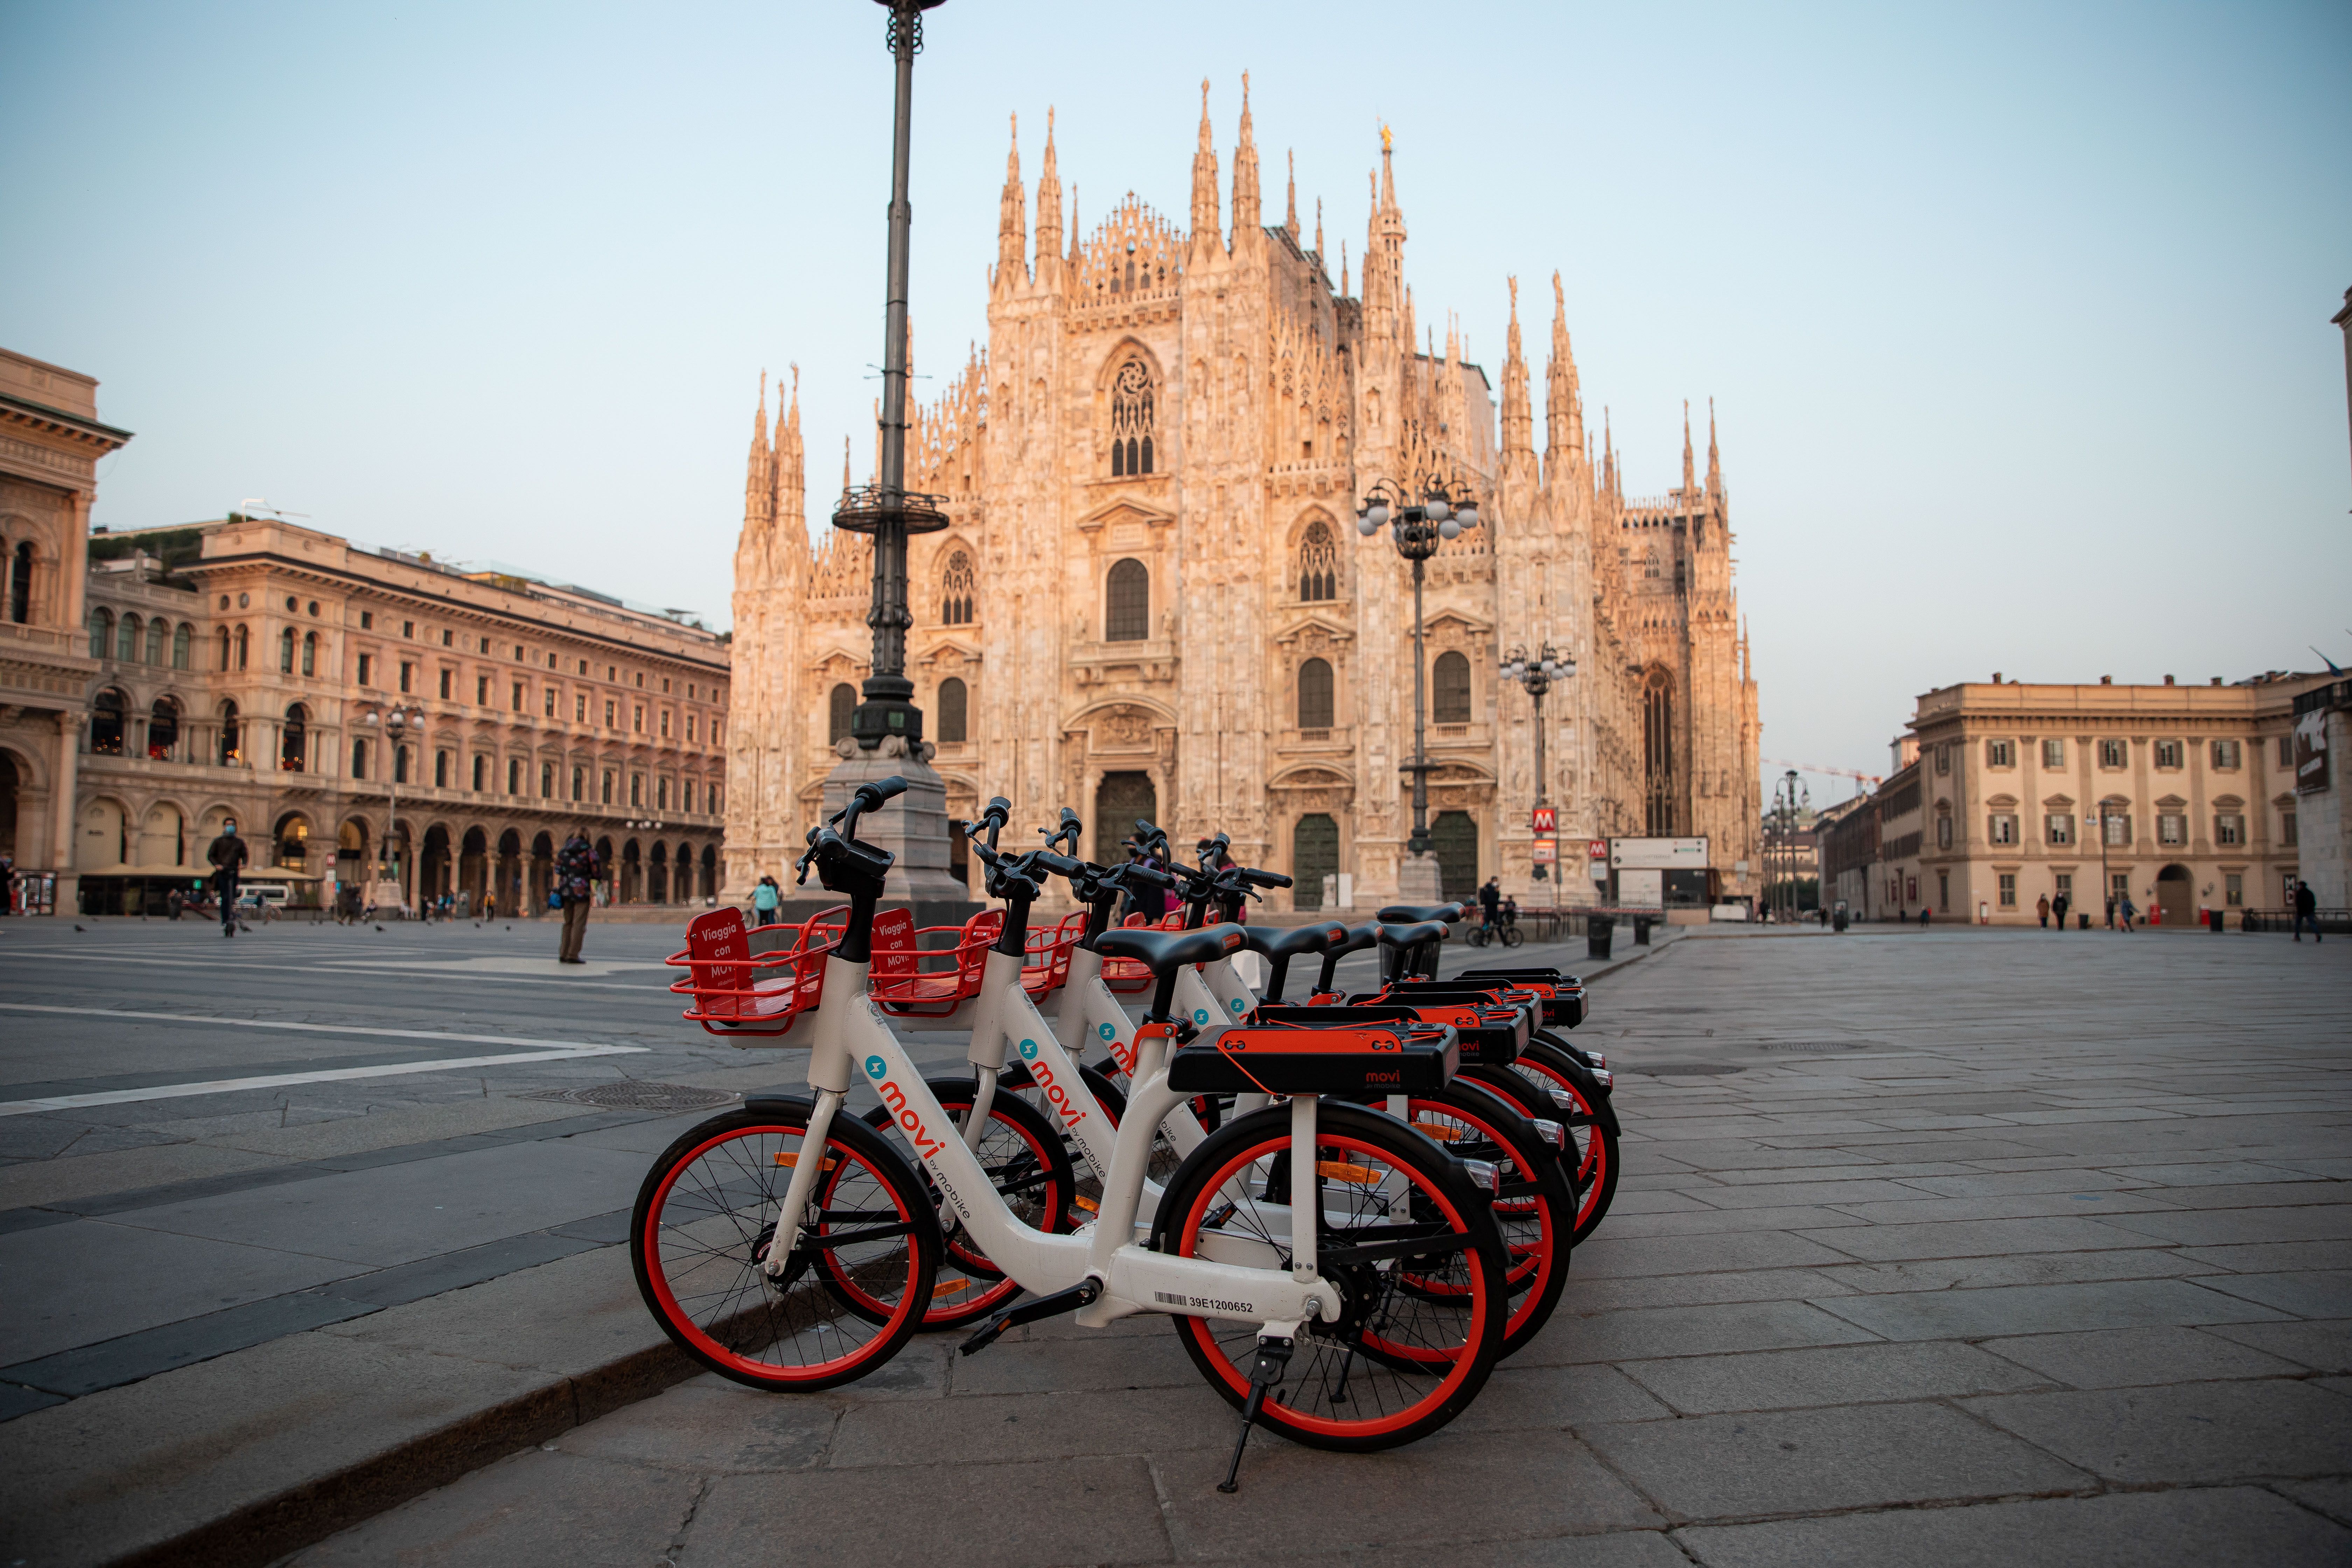 The Piazza Duomo in Milan, Lombardy, on Nov. 6, the first day of the new regional lockdown that has seen a regional travel ban imposed and bars and restaurants shut. 